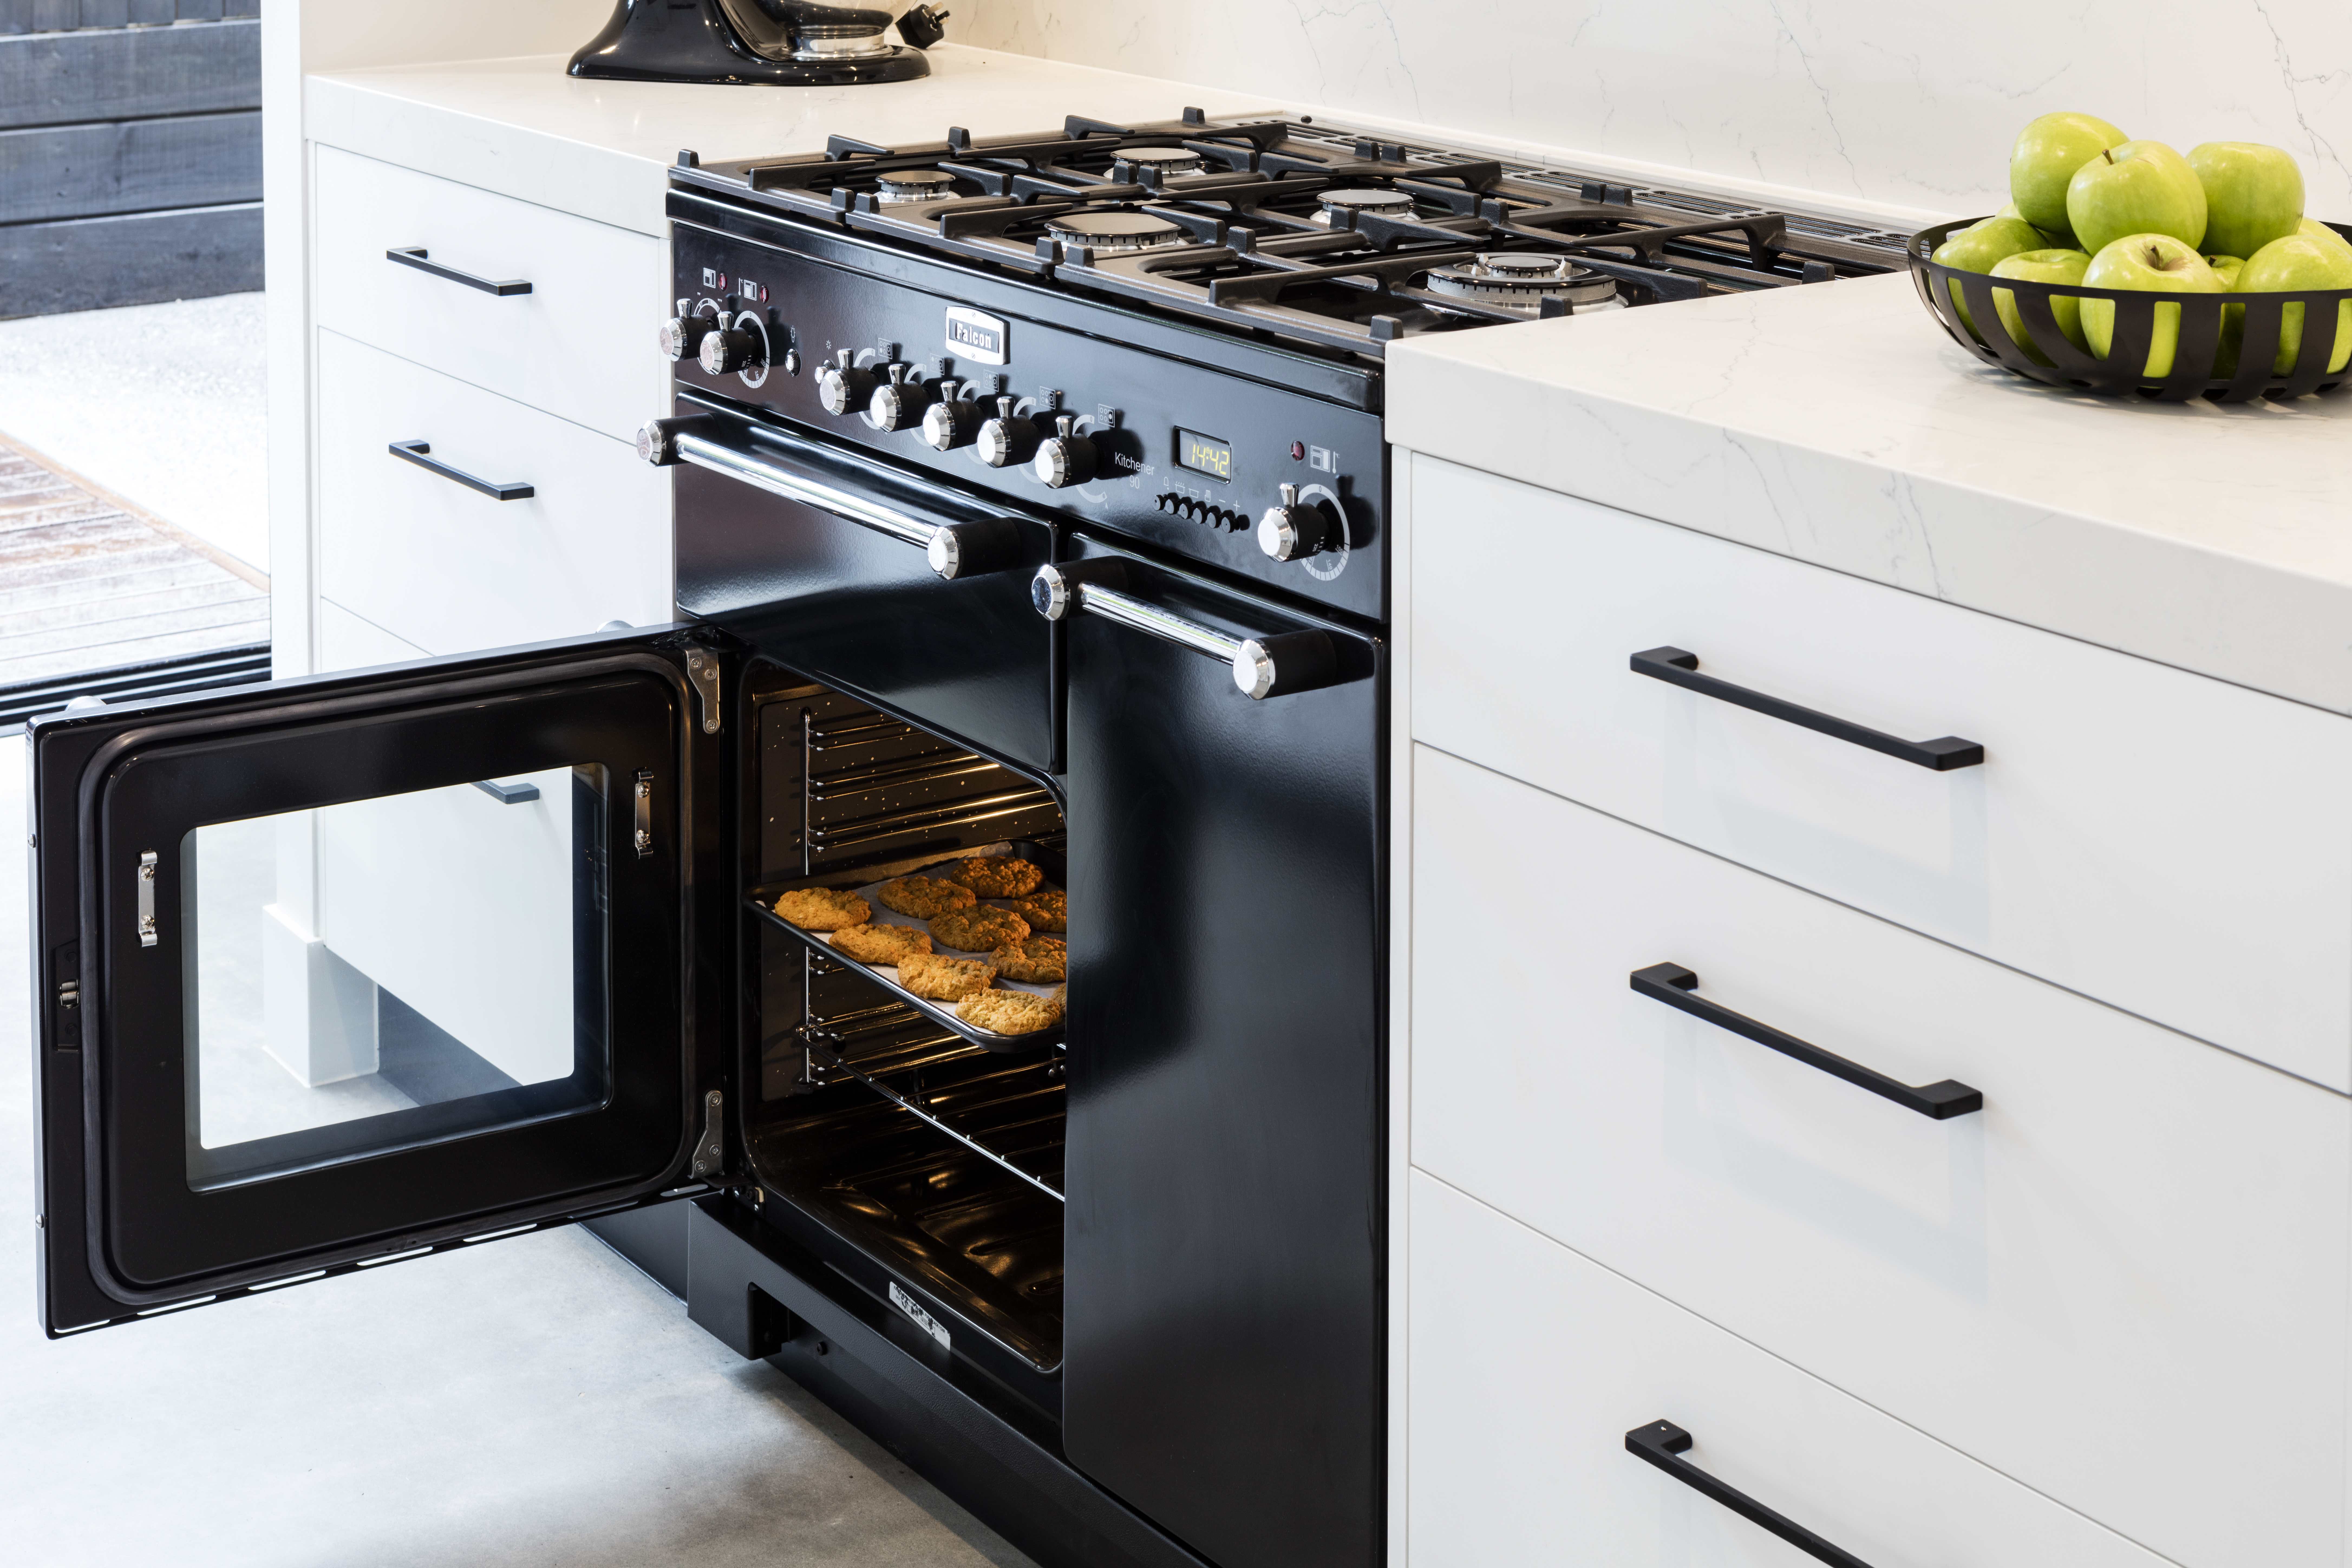 10 Year Warranty On Falcon Range Cookers And/Or Rangehoods Plus 30% Off Rangehoods* at Hart & Co